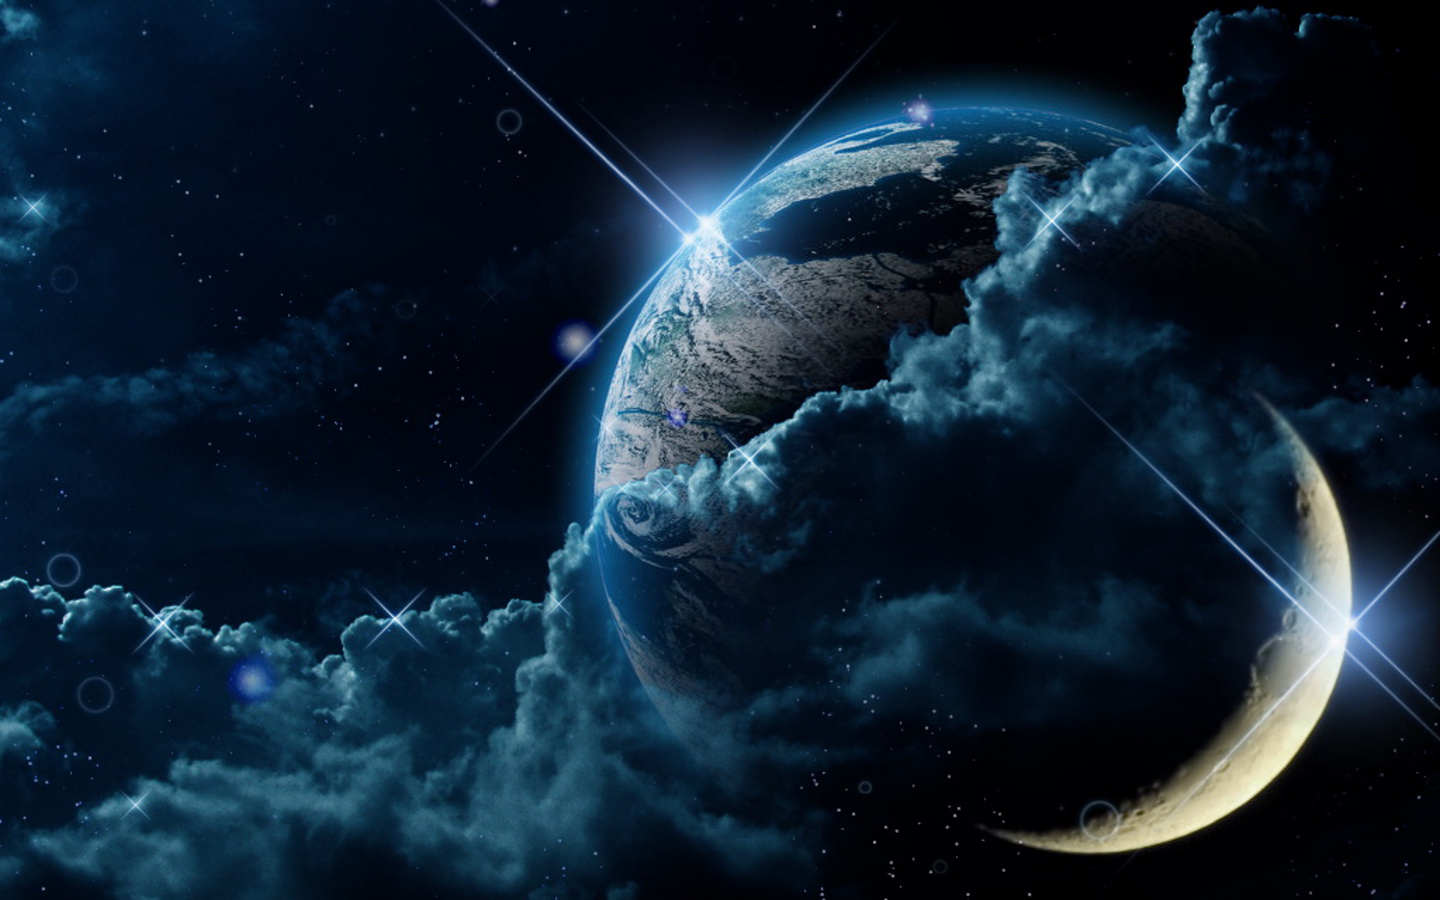  Fantasy Mysterious Space Free Wallpaper 1440x900 Full HD Wallpapers